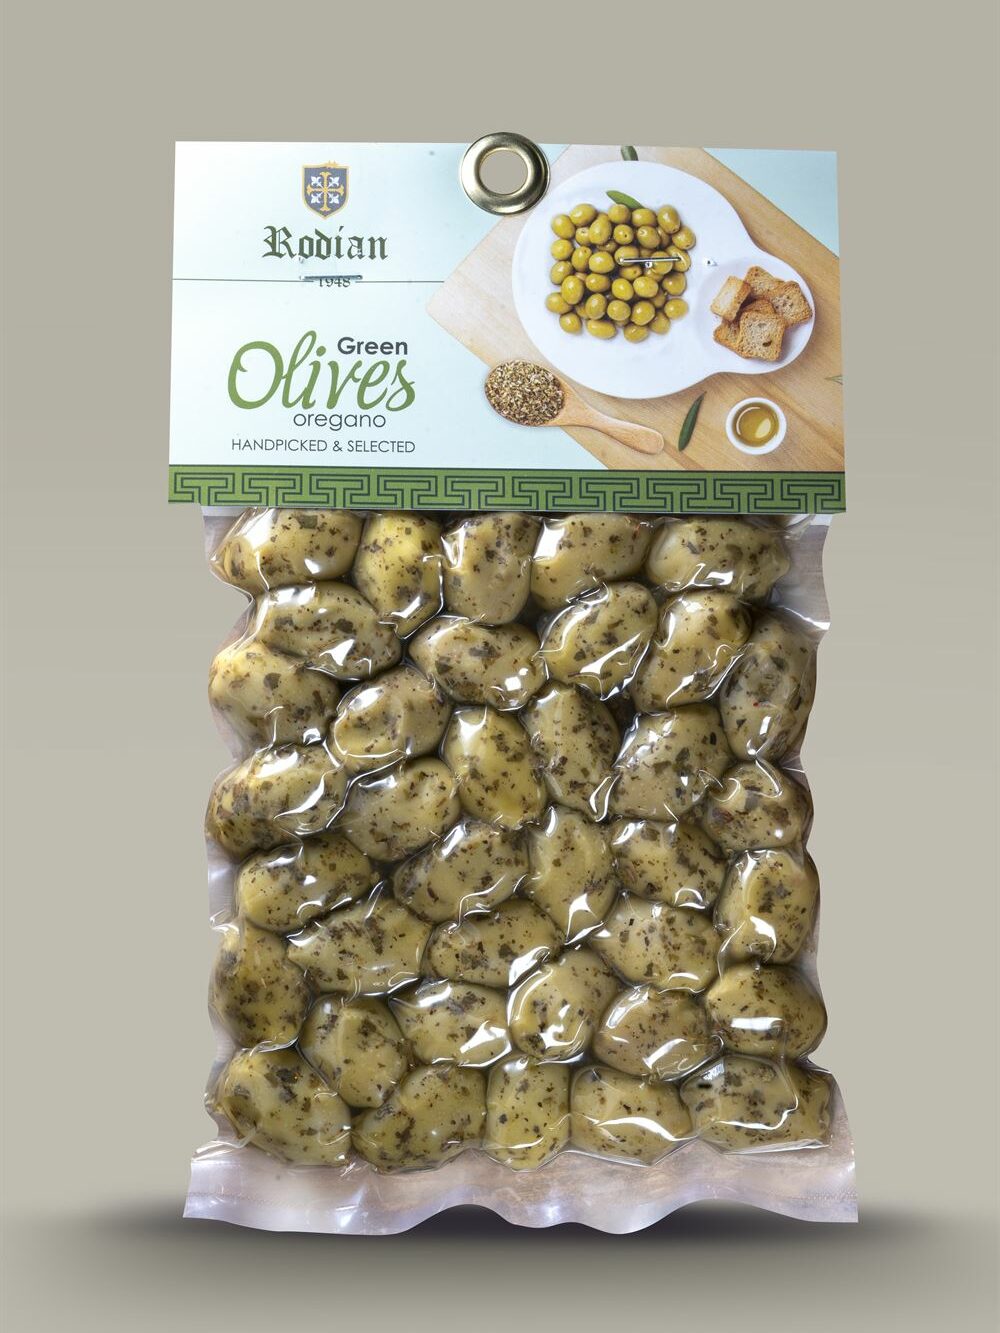 Green Olives with oregano in vacuum - The best olive in Rhodes